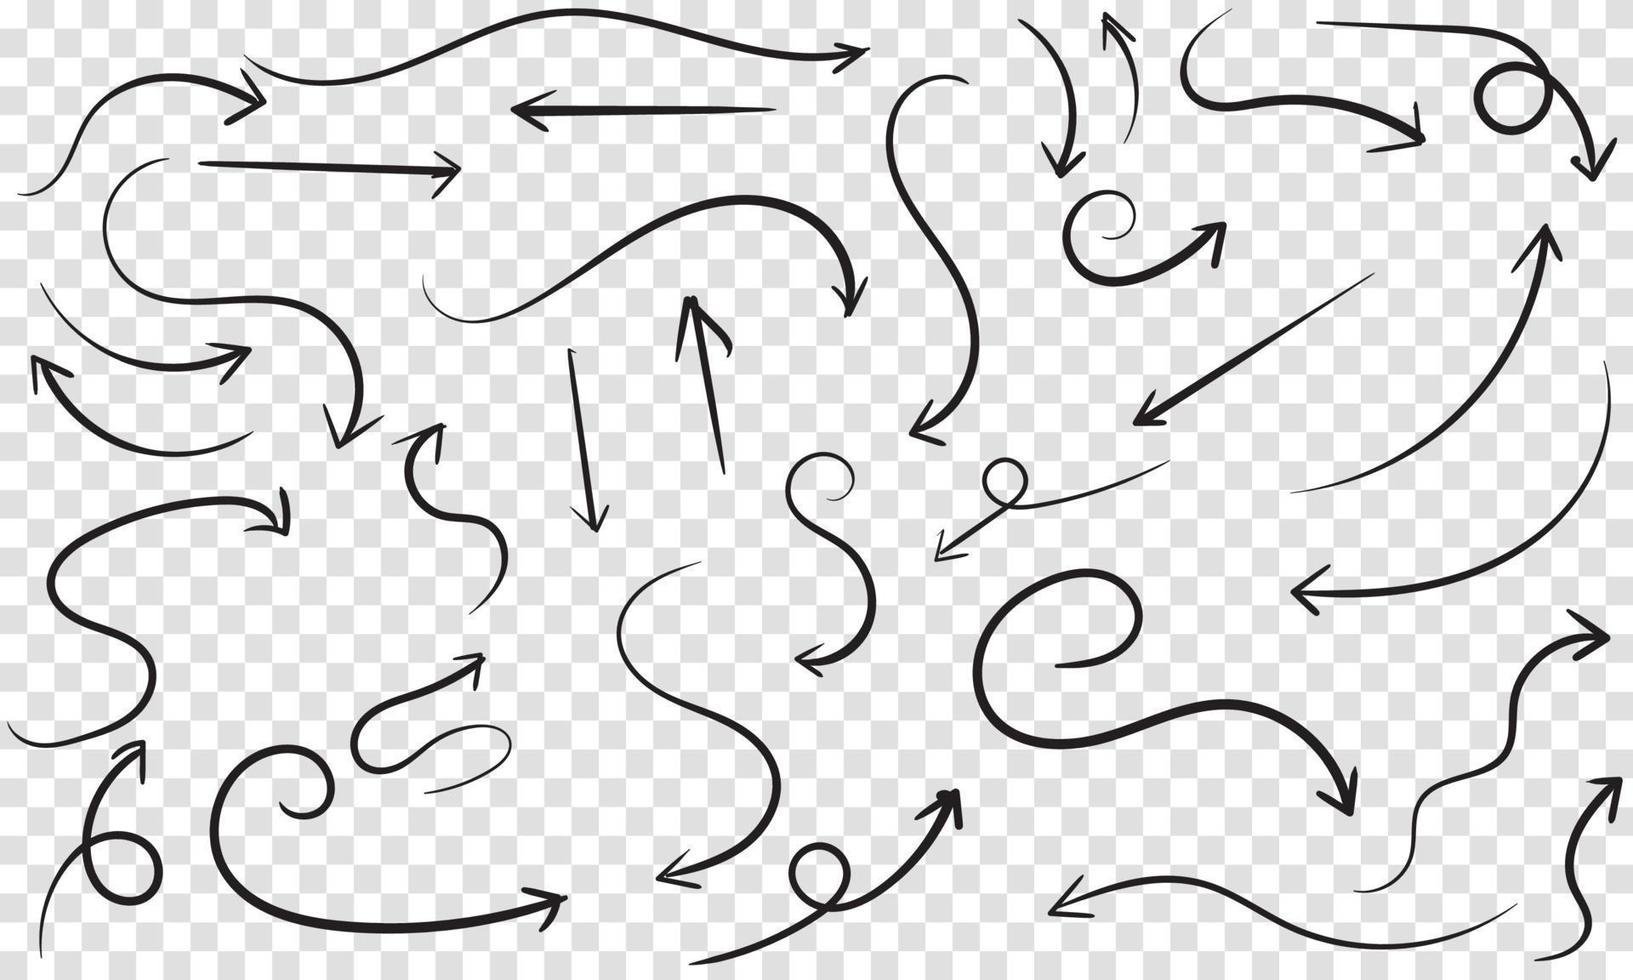 Set of vector curved arrows hand drawn. Sketch doodle style. Collection of pointers. Vector illustration